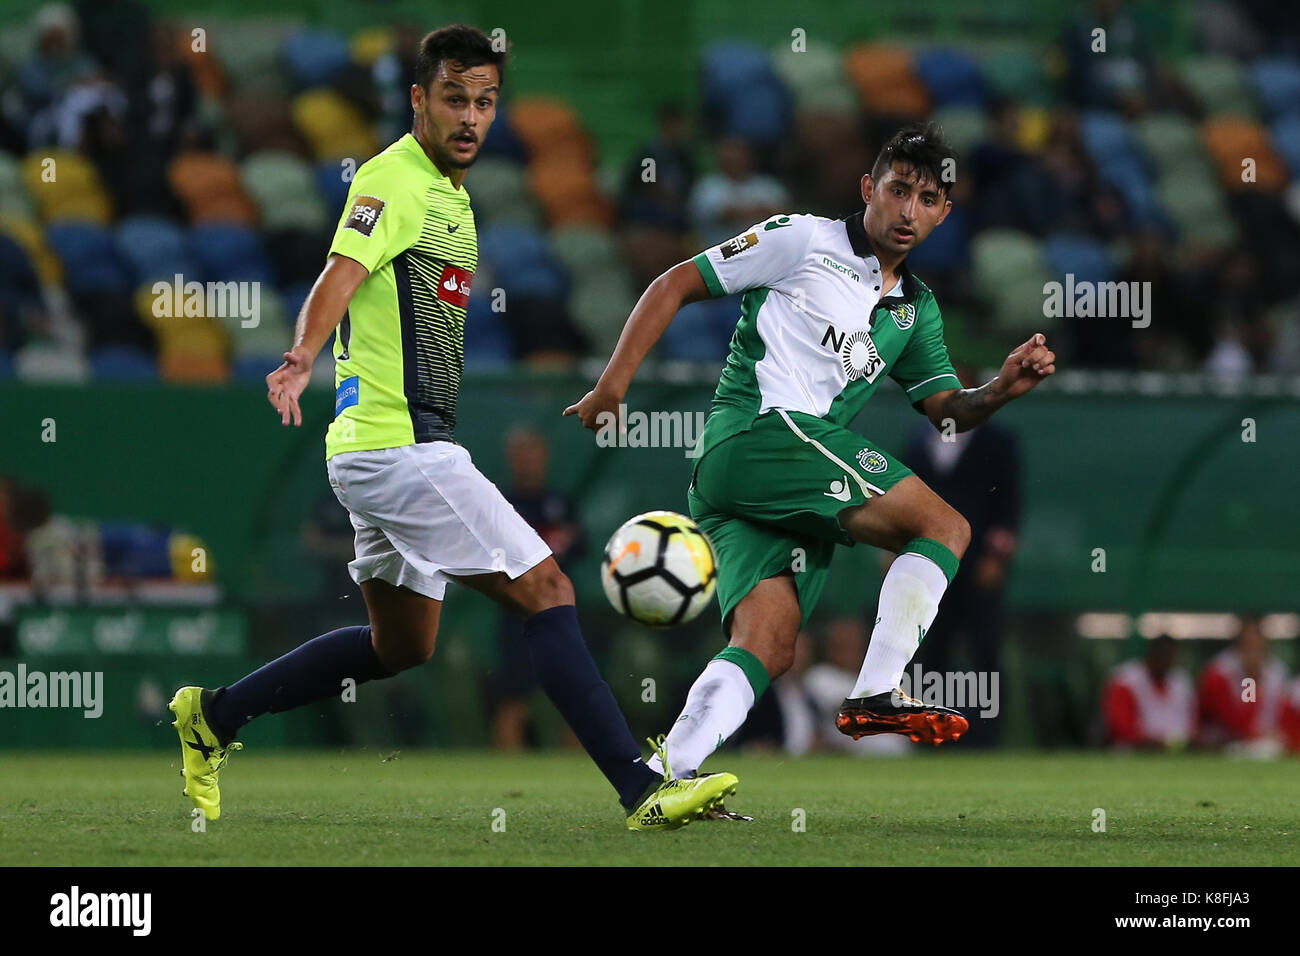 Lisbon, Portugal. 19th Sep, 2017. Sporting's forward Bryan Ruiz from Costa Rica (R) and Maritimo's midfielder Filipe Oliveira from Portugal (L) during the Portuguese Cup 2017/18 match between Sporting CP v CS Maritimo, at Alvalade Stadium in Lisbon on September 19, 2017. Credit: Bruno Barros/Alamy Live News Stock Photo